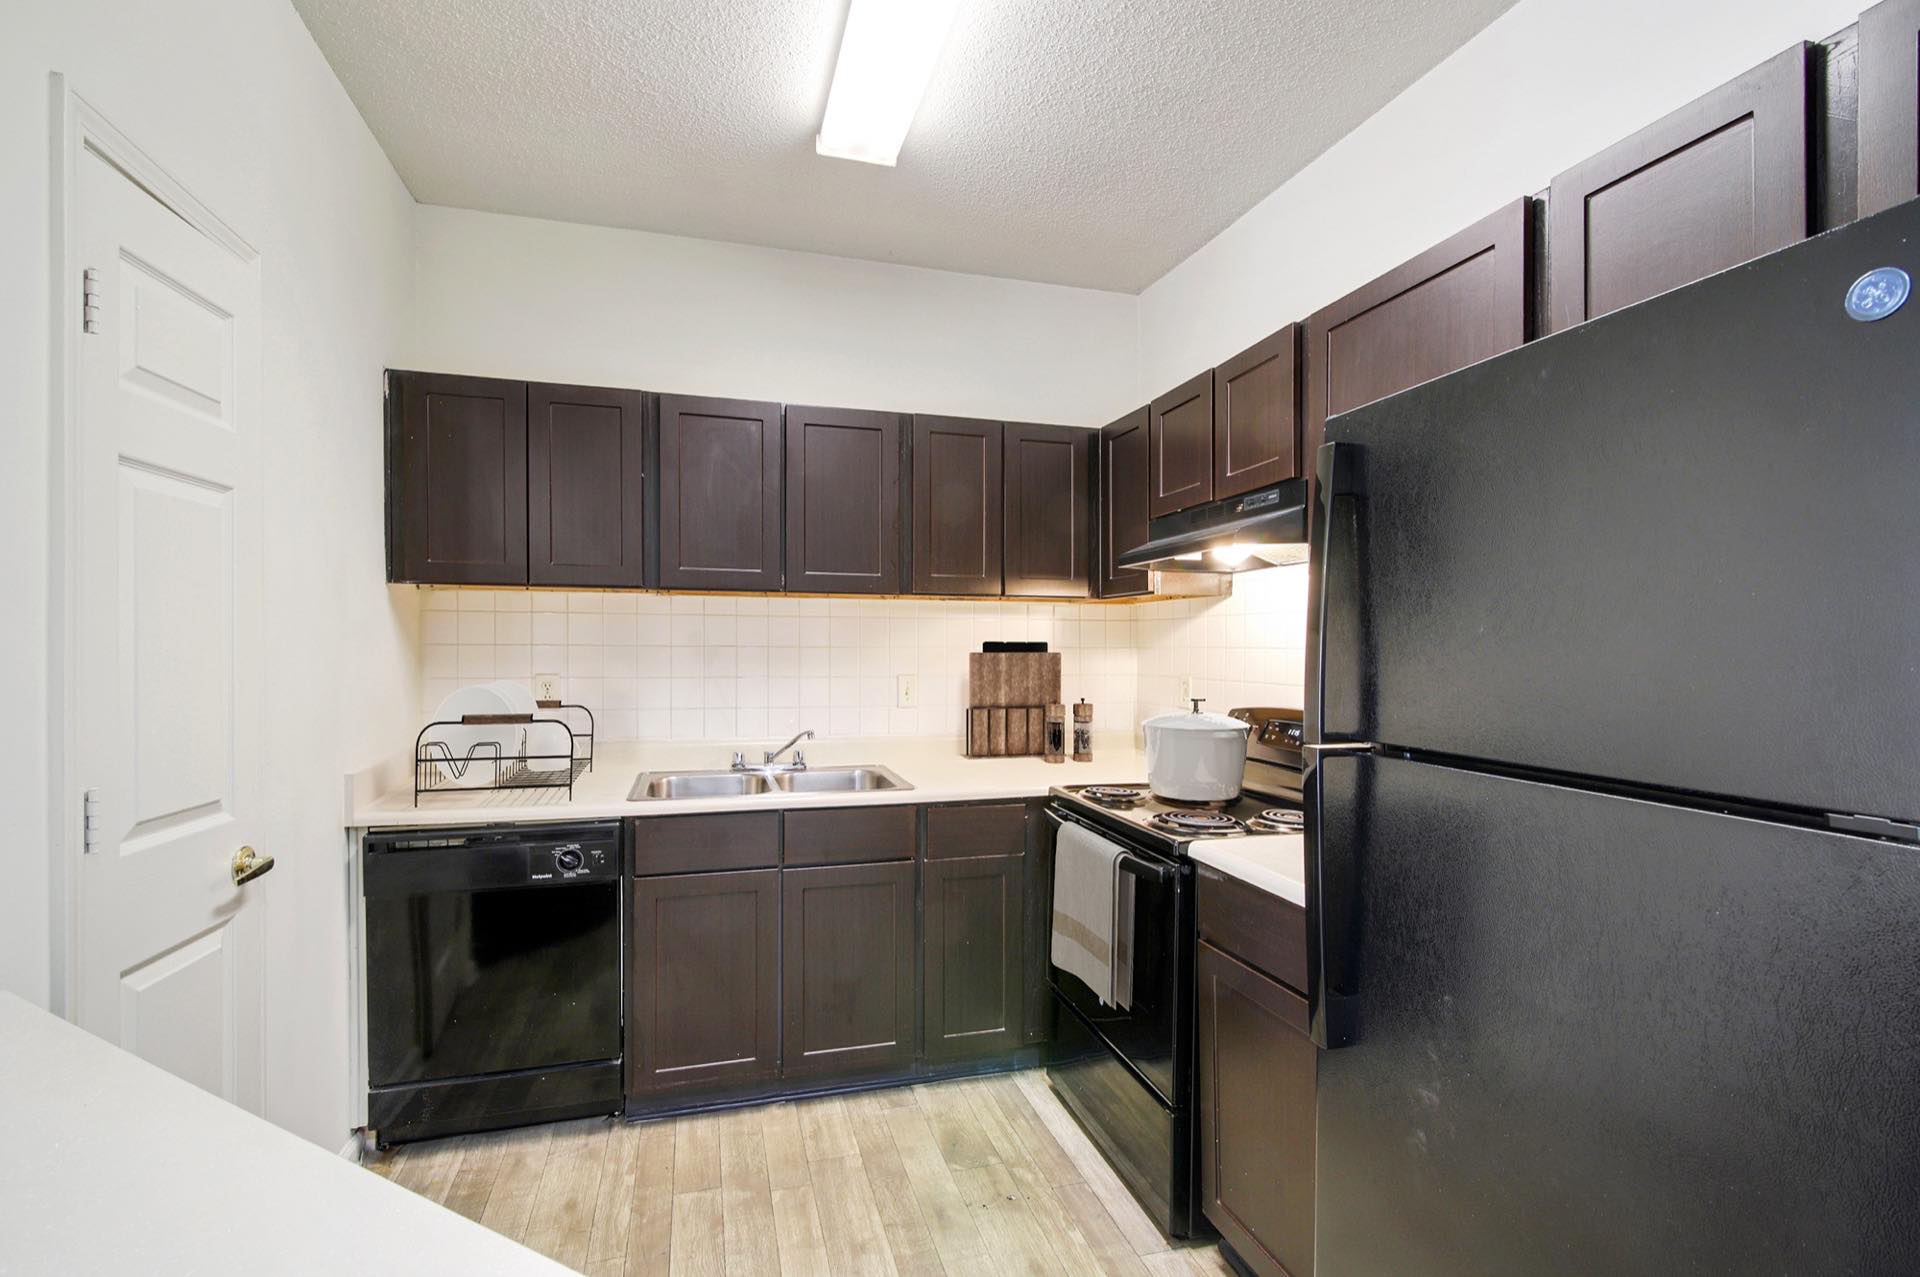 Kitchen with brown cabinets and black appliances